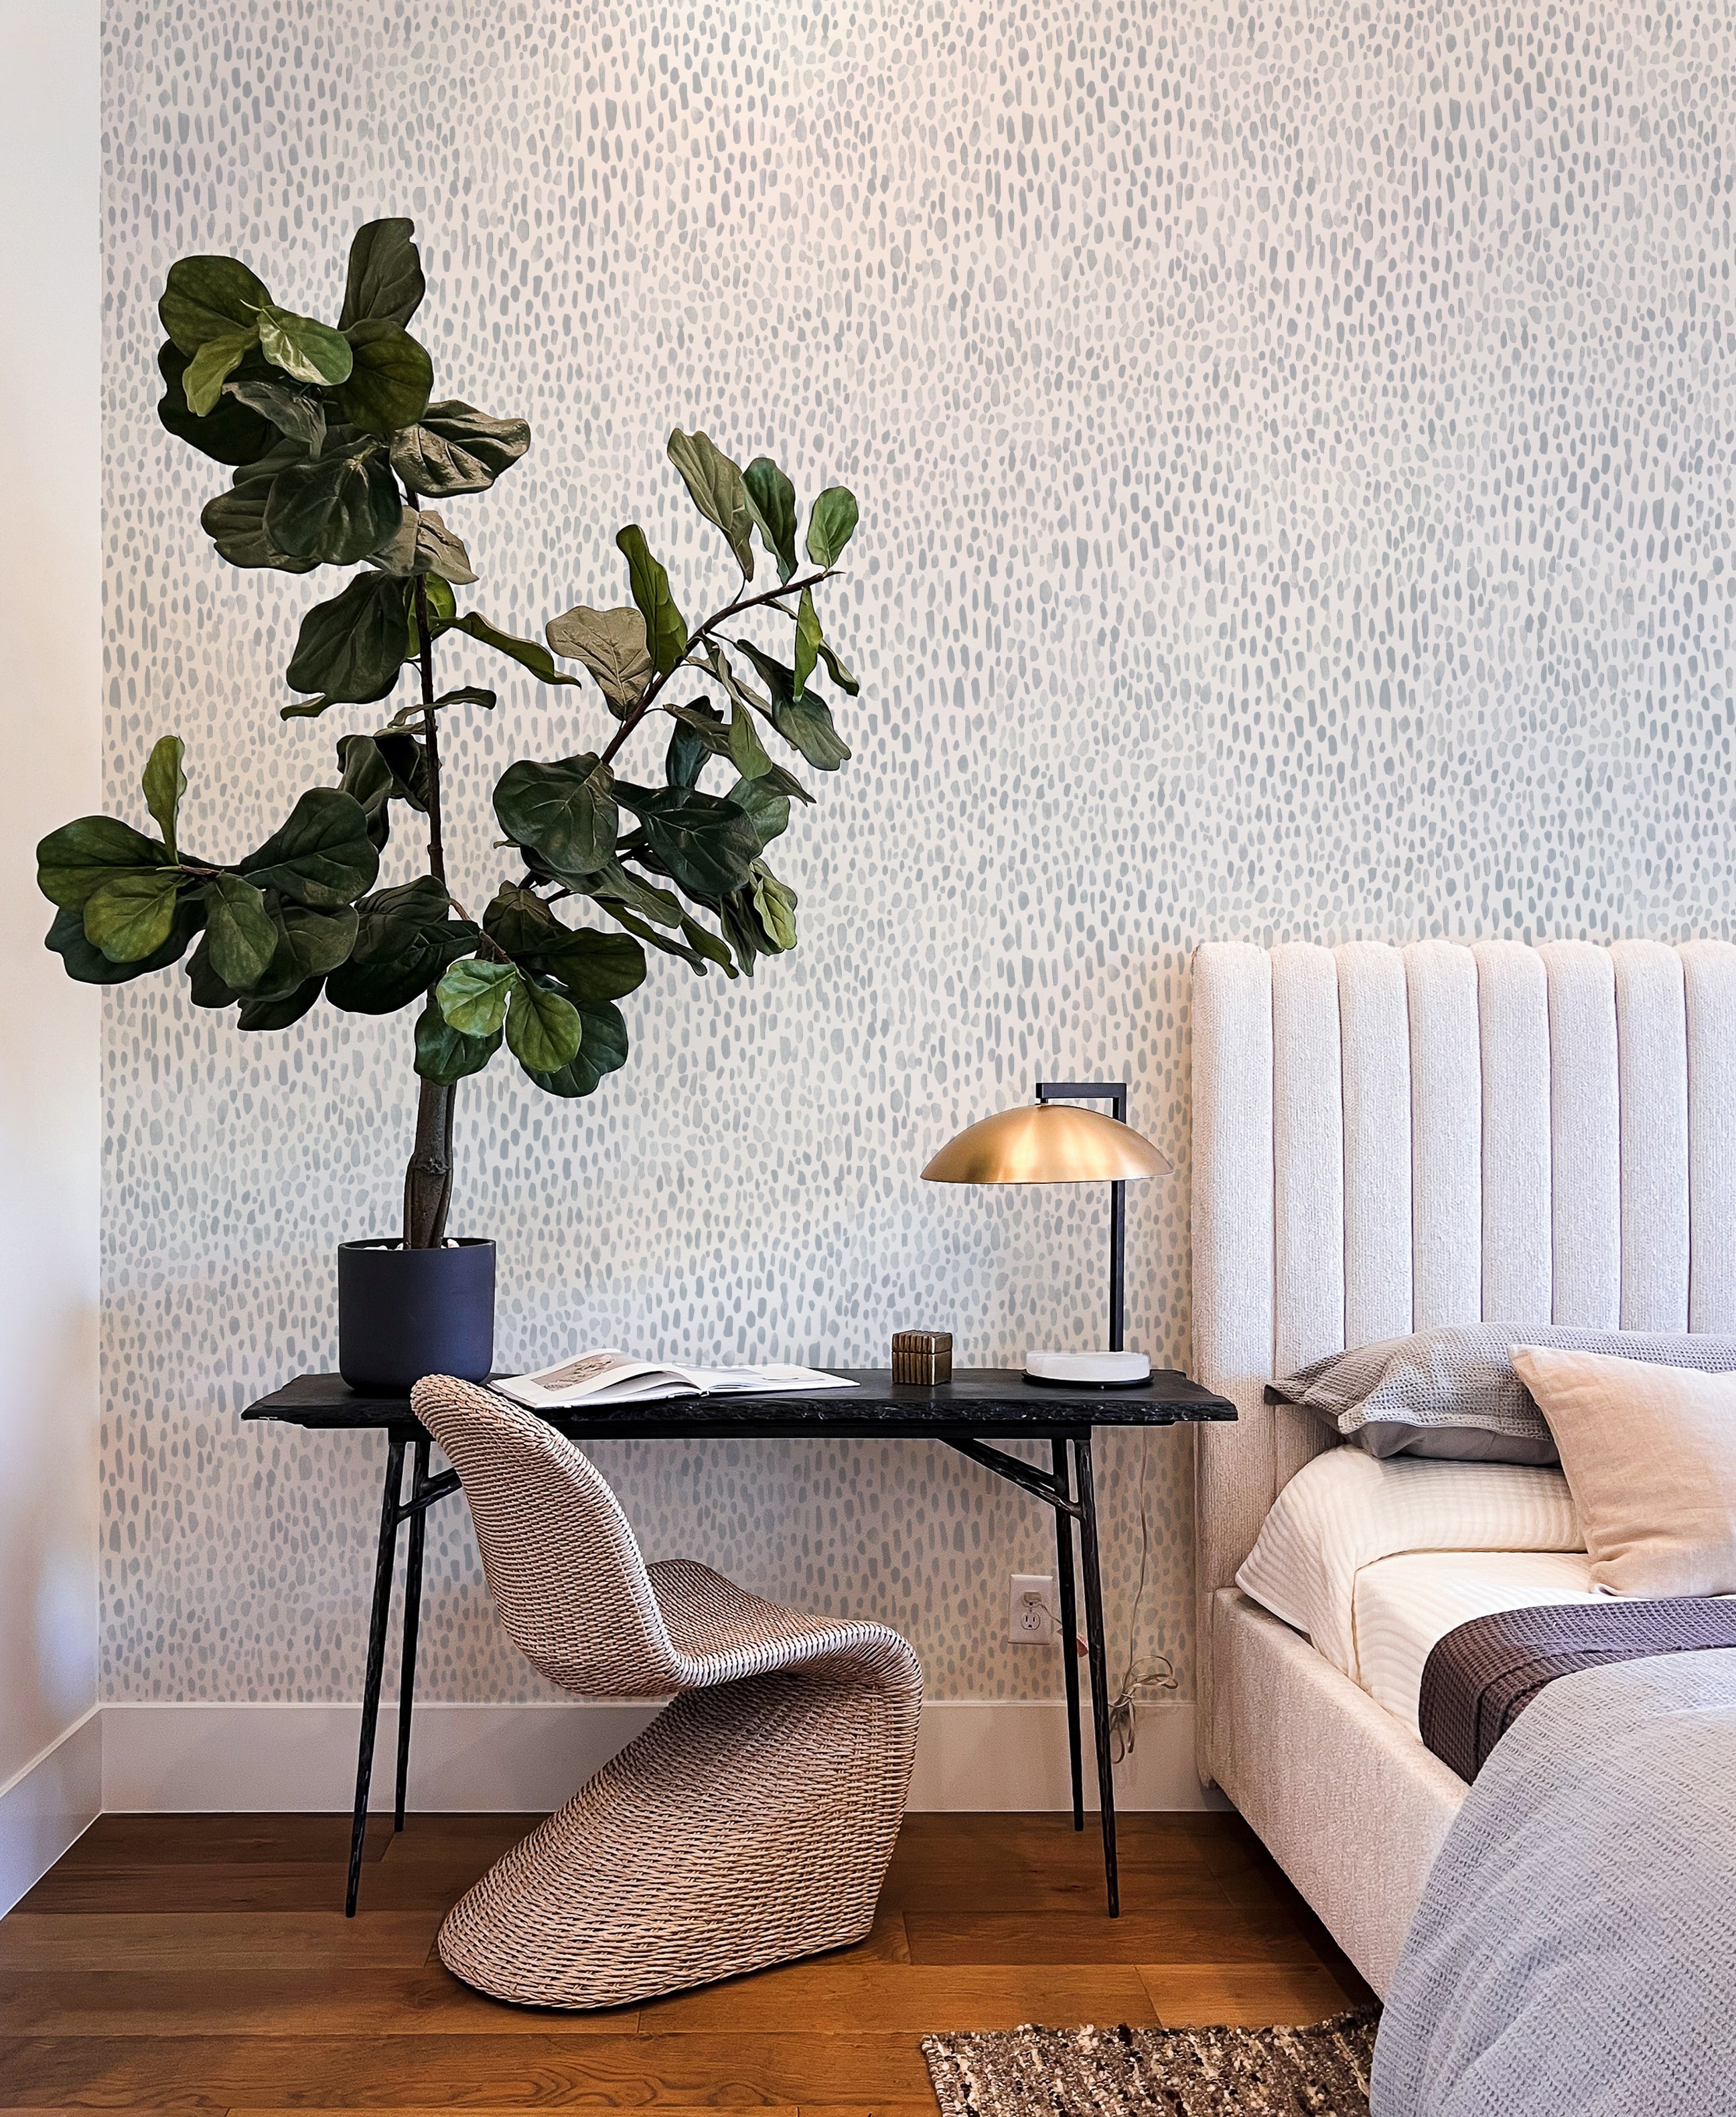 Big Boho Hand Painted Dots Wallpaper' adorns a chic room's wall, providing a stylish backdrop to a cozy reading nook with a plush armchair, elegant lamp, and a lush potted plant